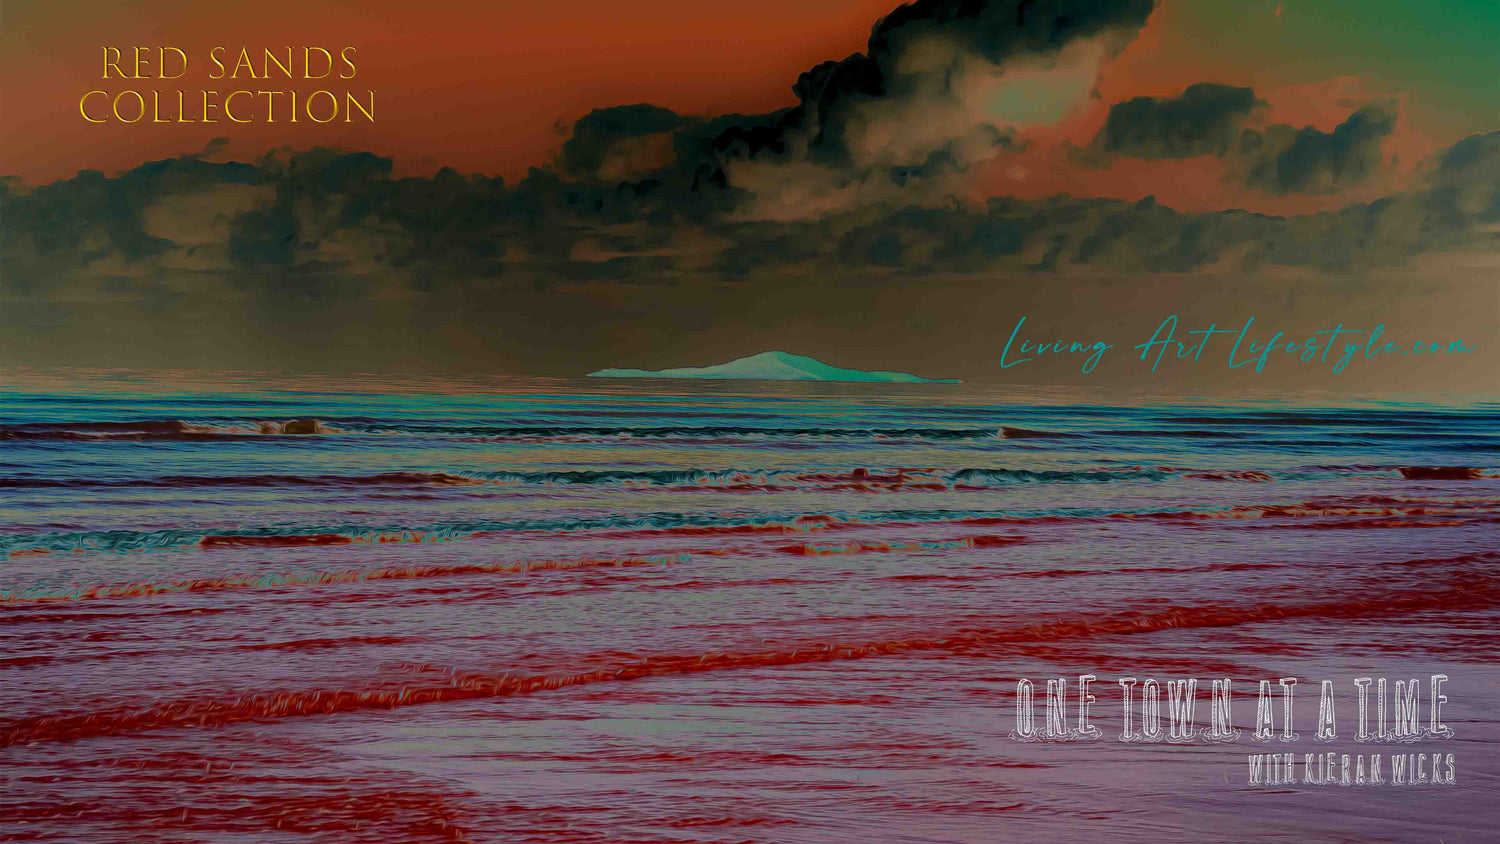 RED SANDS COLLECTION Island Townsivlle Great Barrier Reef Surreal Digital Art Beach Ocean Waves